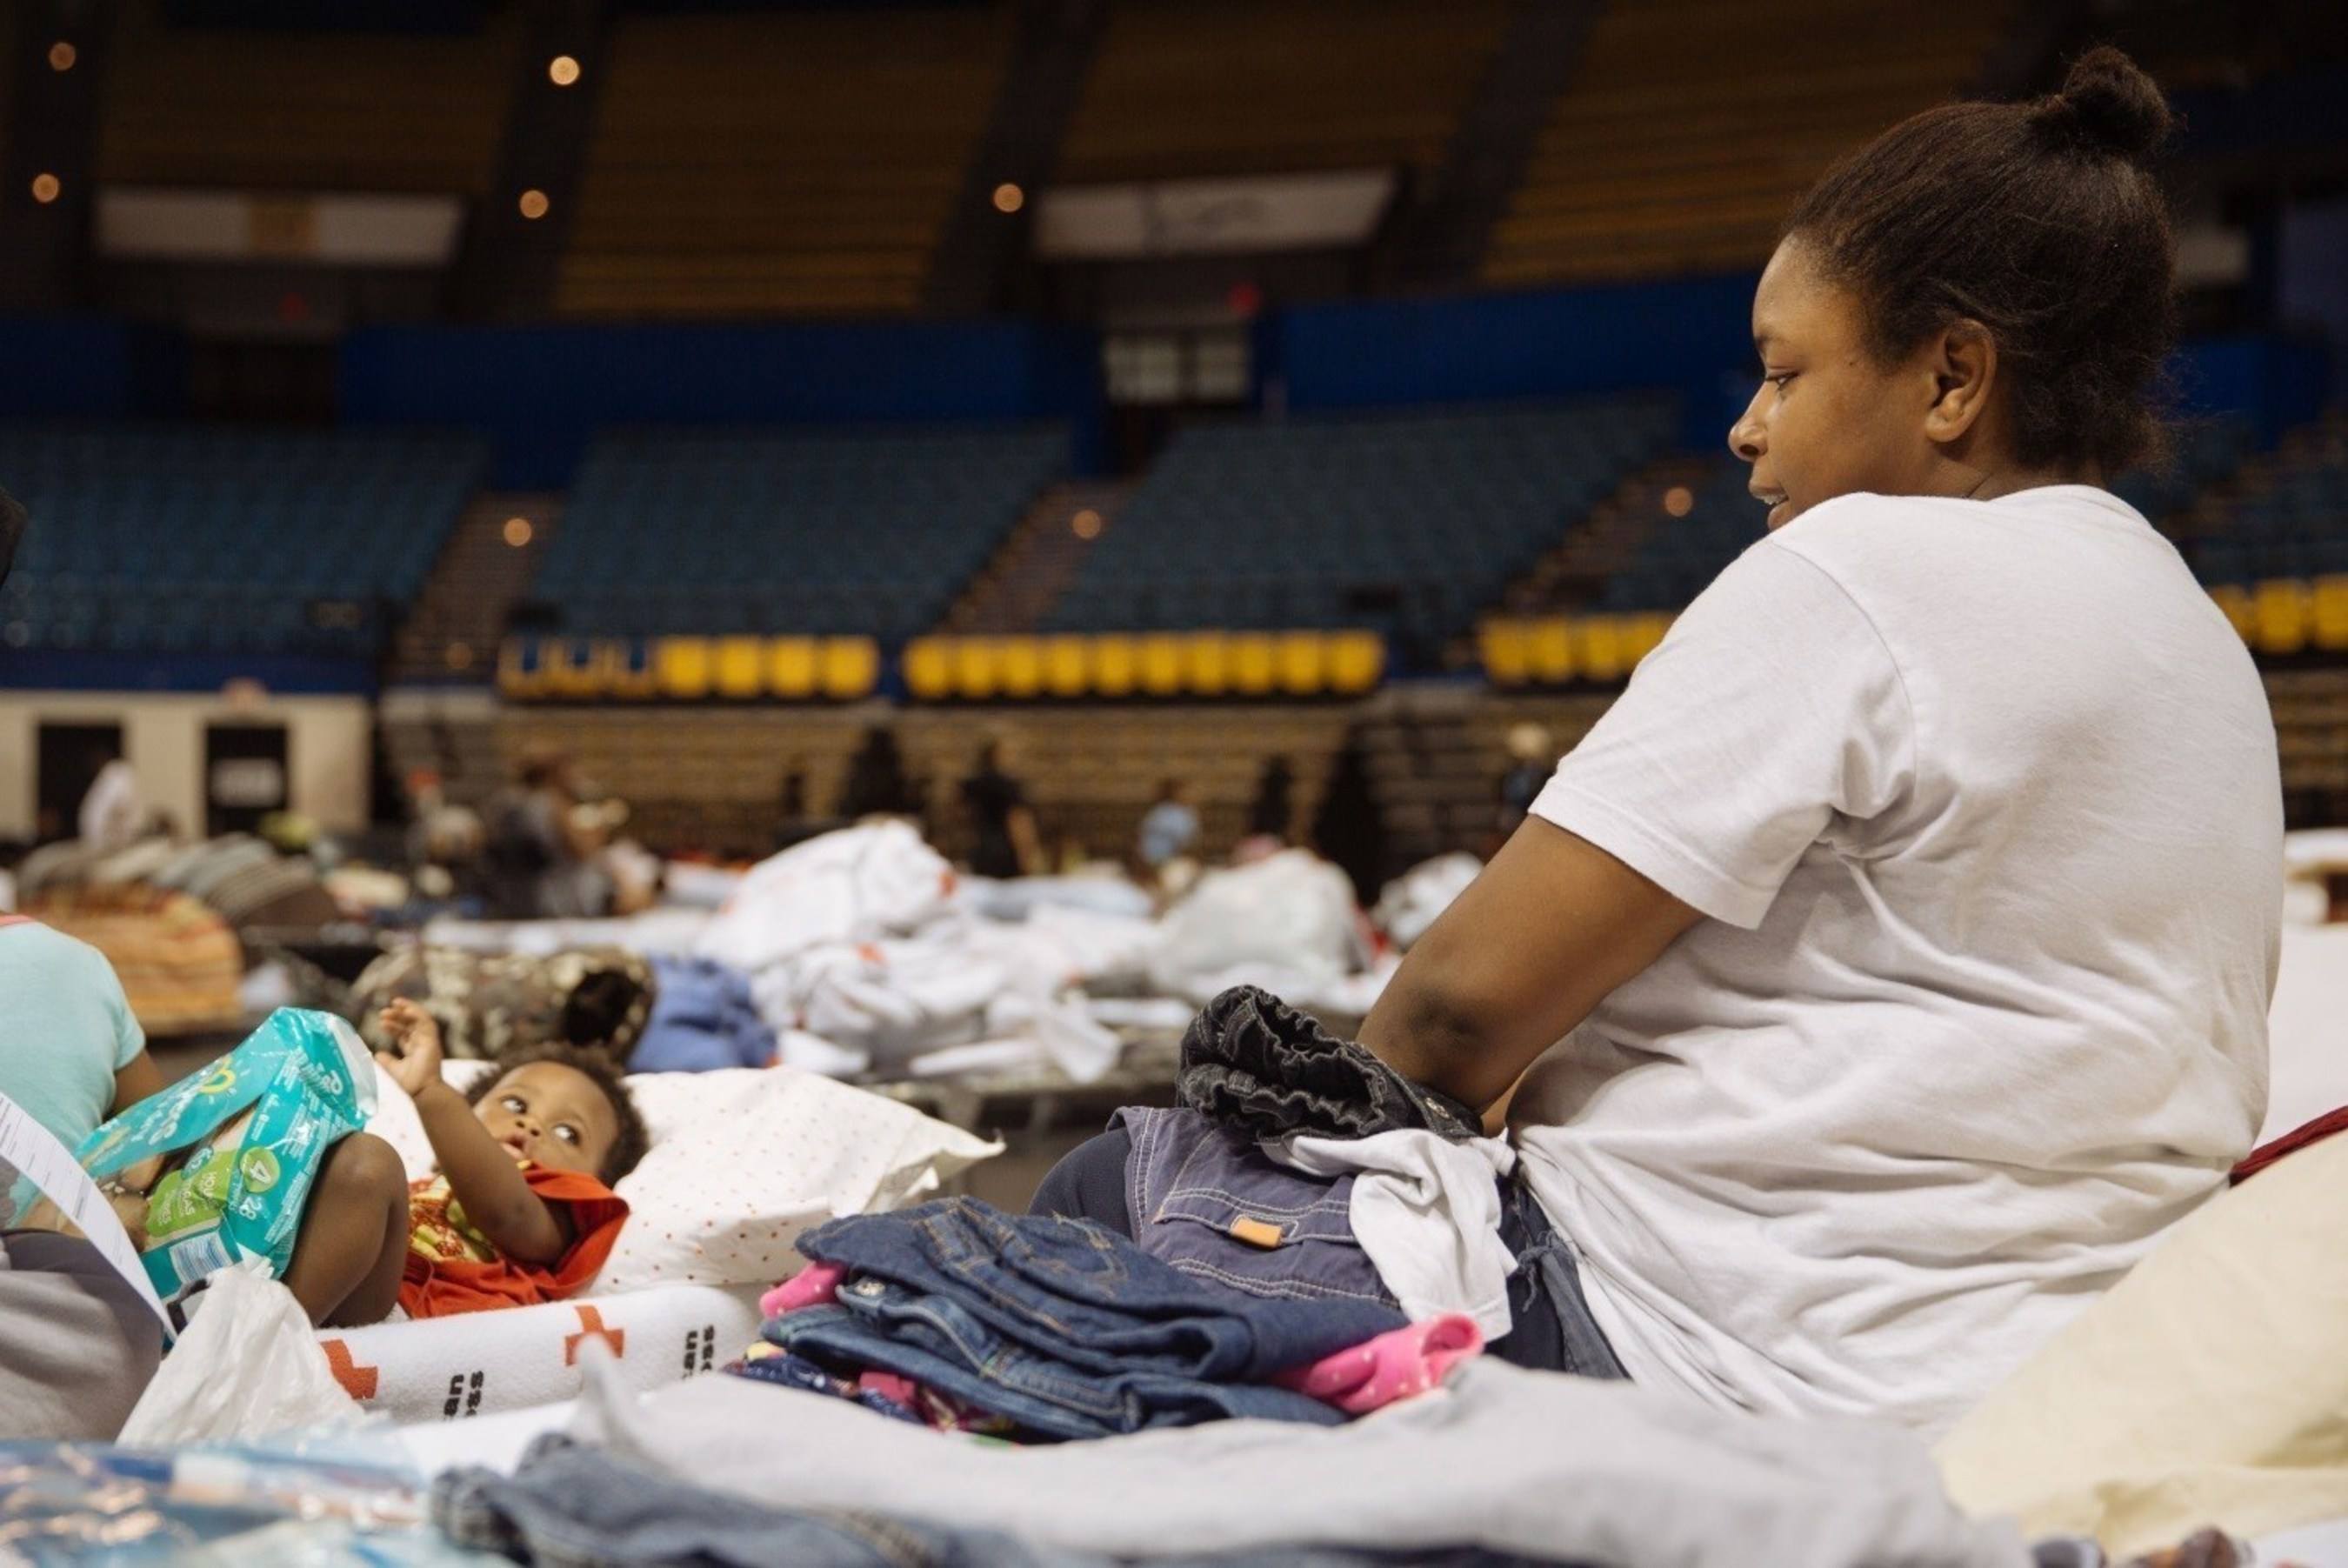 Tenisha Longmire keeps a watchful eye over her 2 year old, Derrick, in a Red Cross shelter in Baton Rouge. Red Cross Photo by Nicholas Small